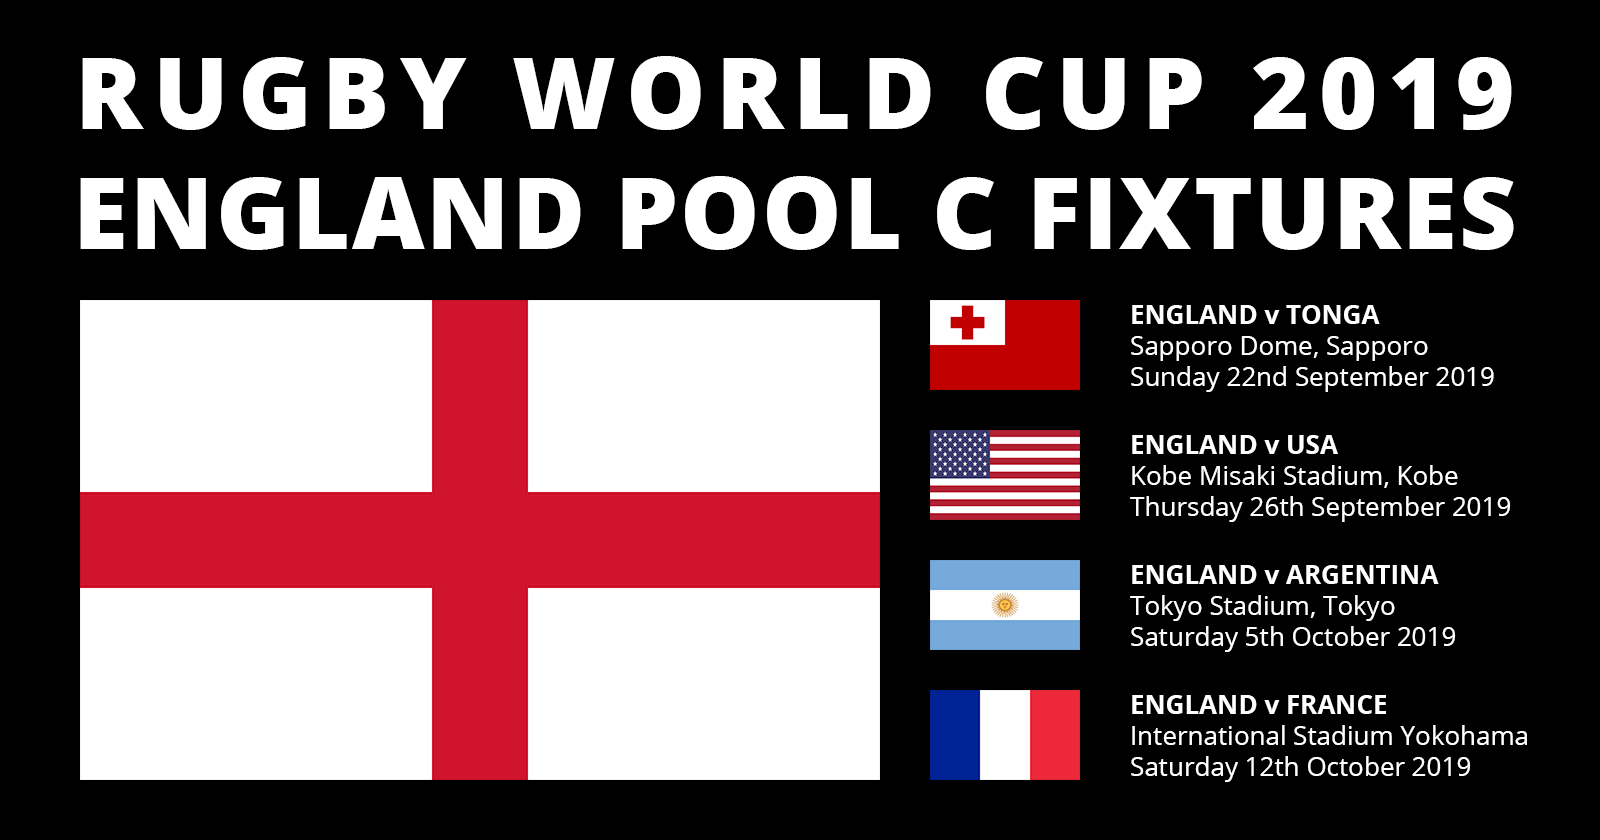 England Rugby World Cup 2019 Fixtures